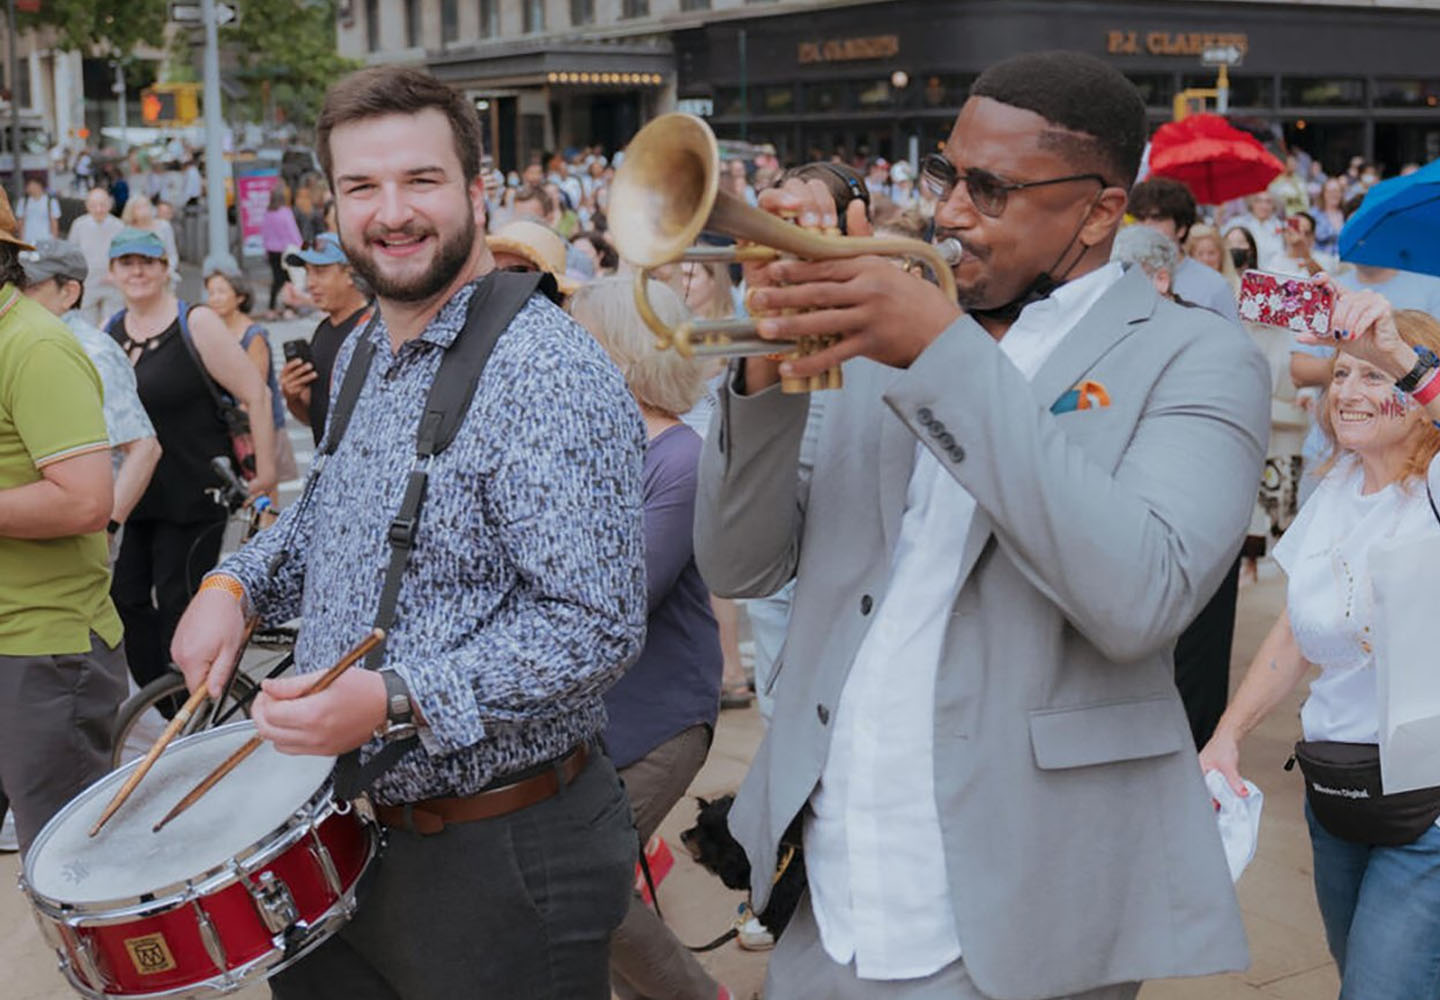 Jazz at Lincoln Center Second Line